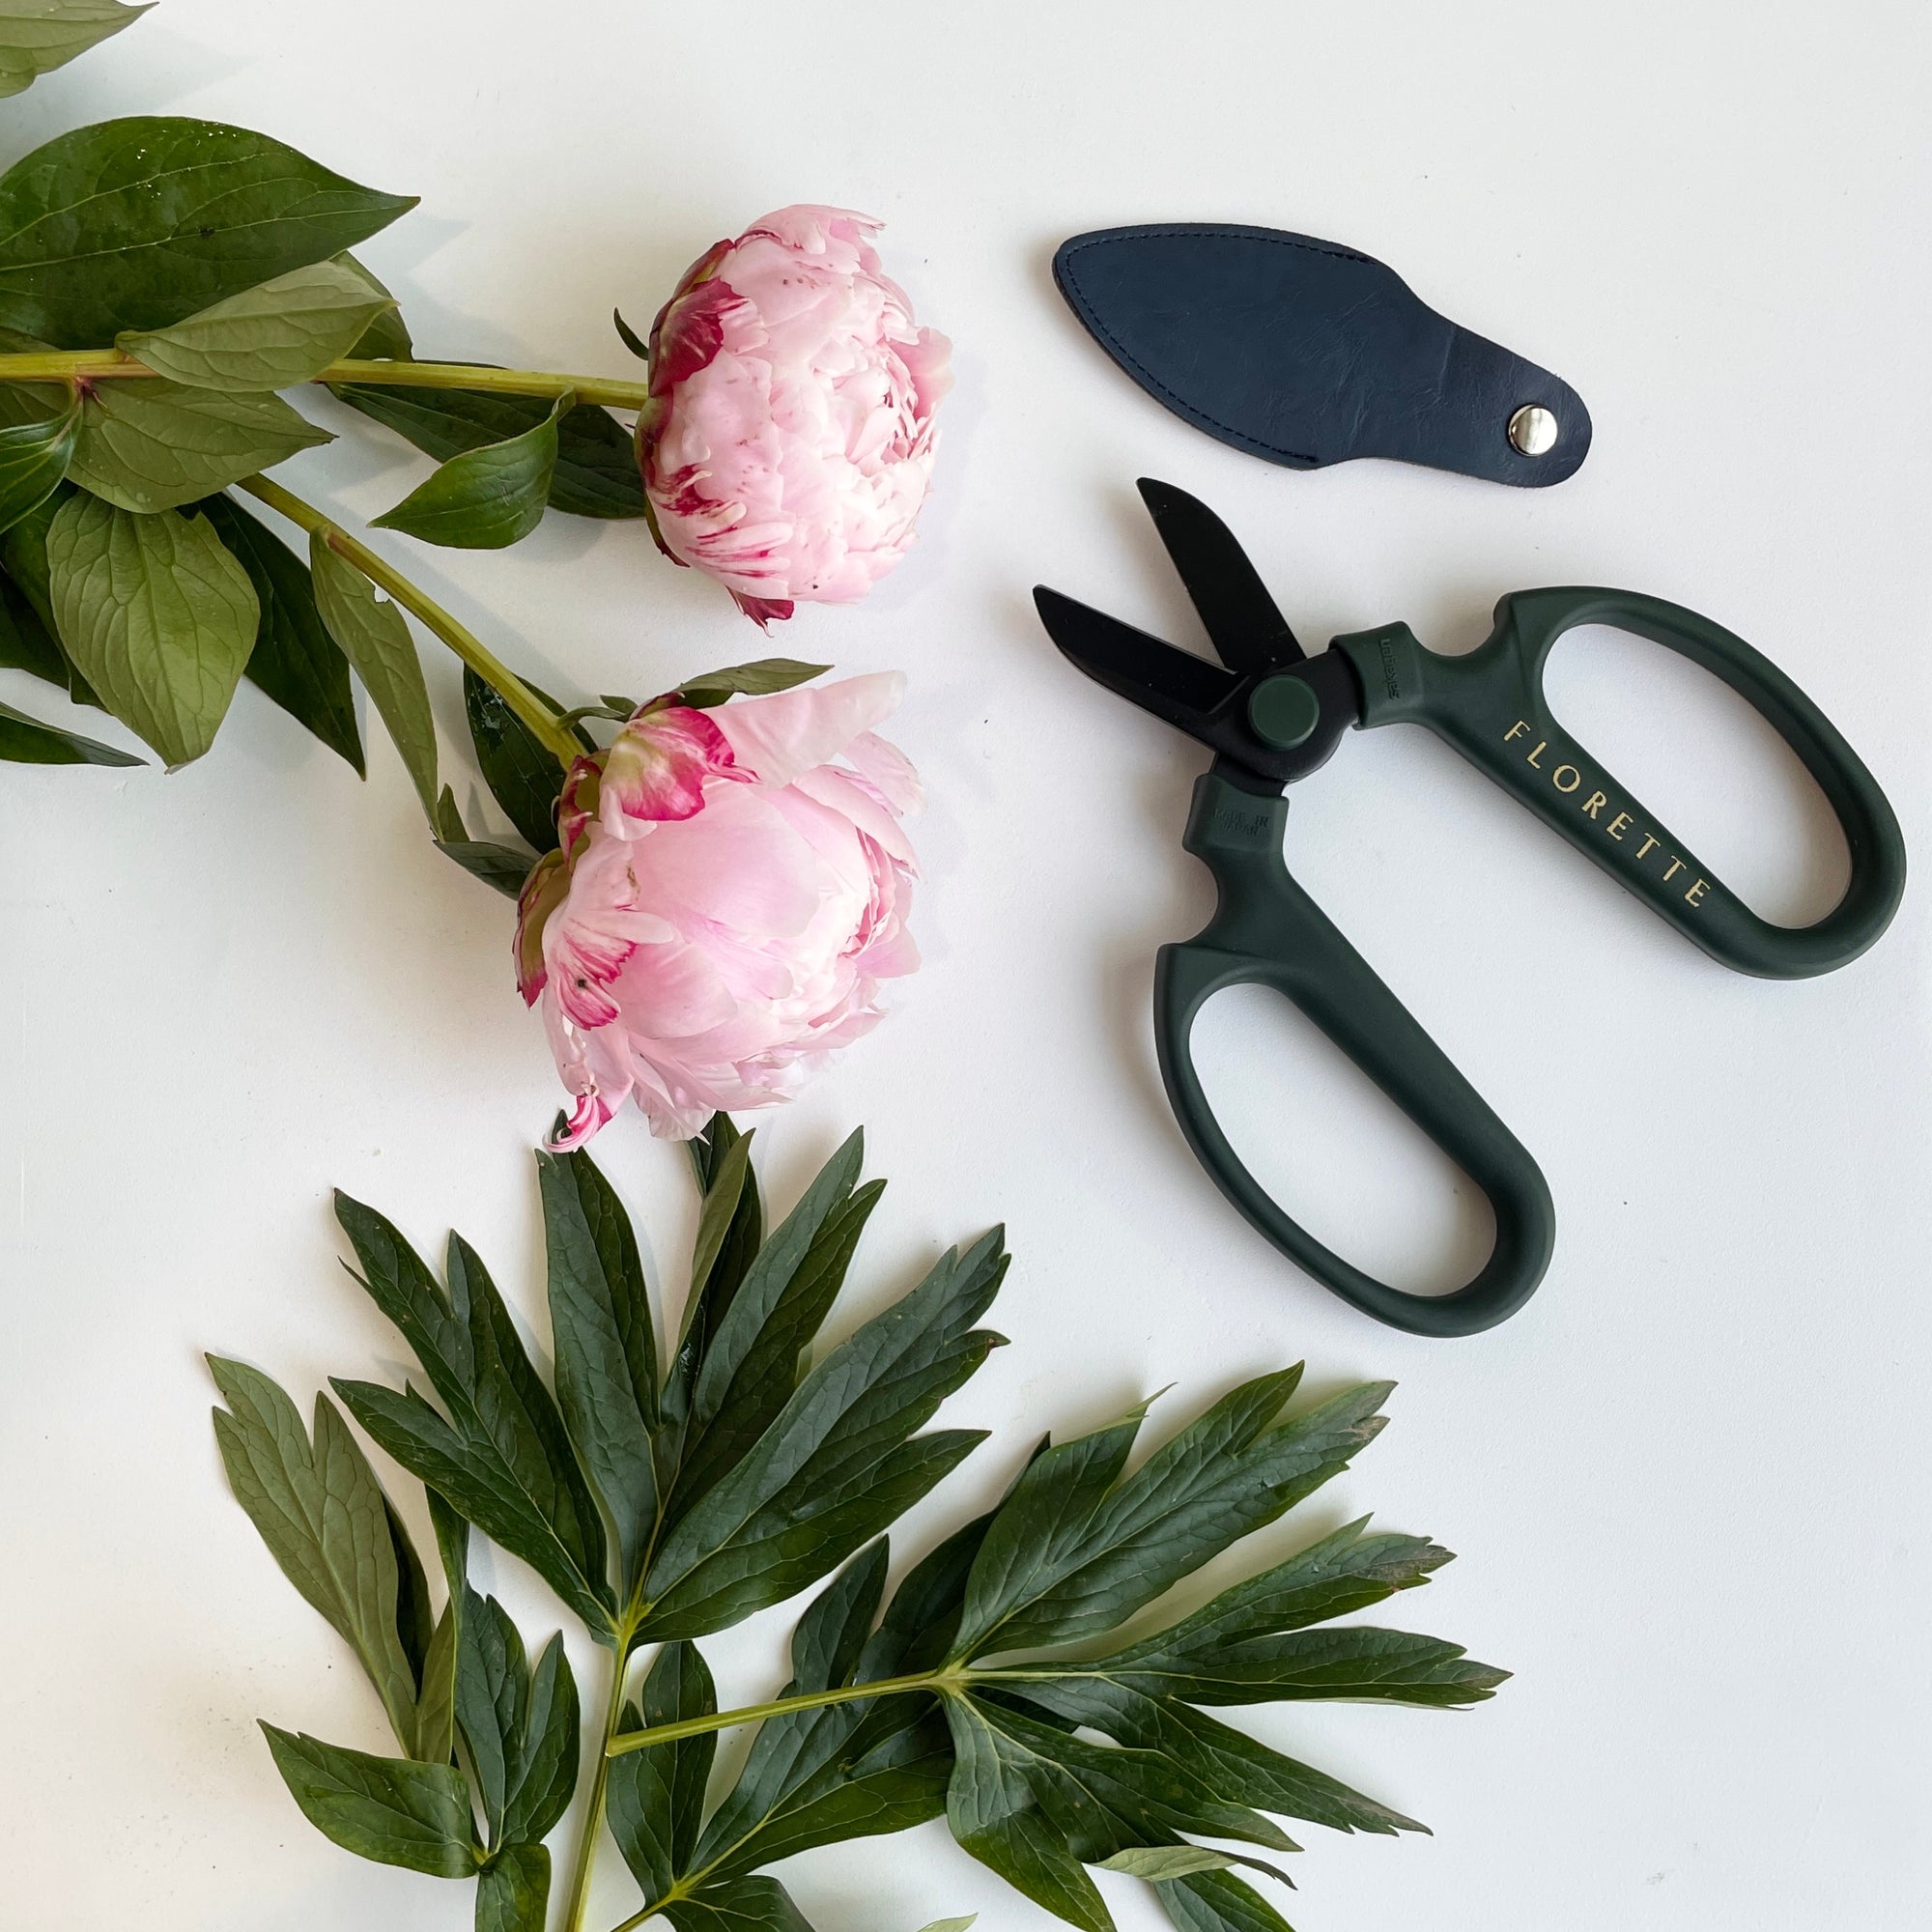 Floristry Scissors - Green with Black Blade